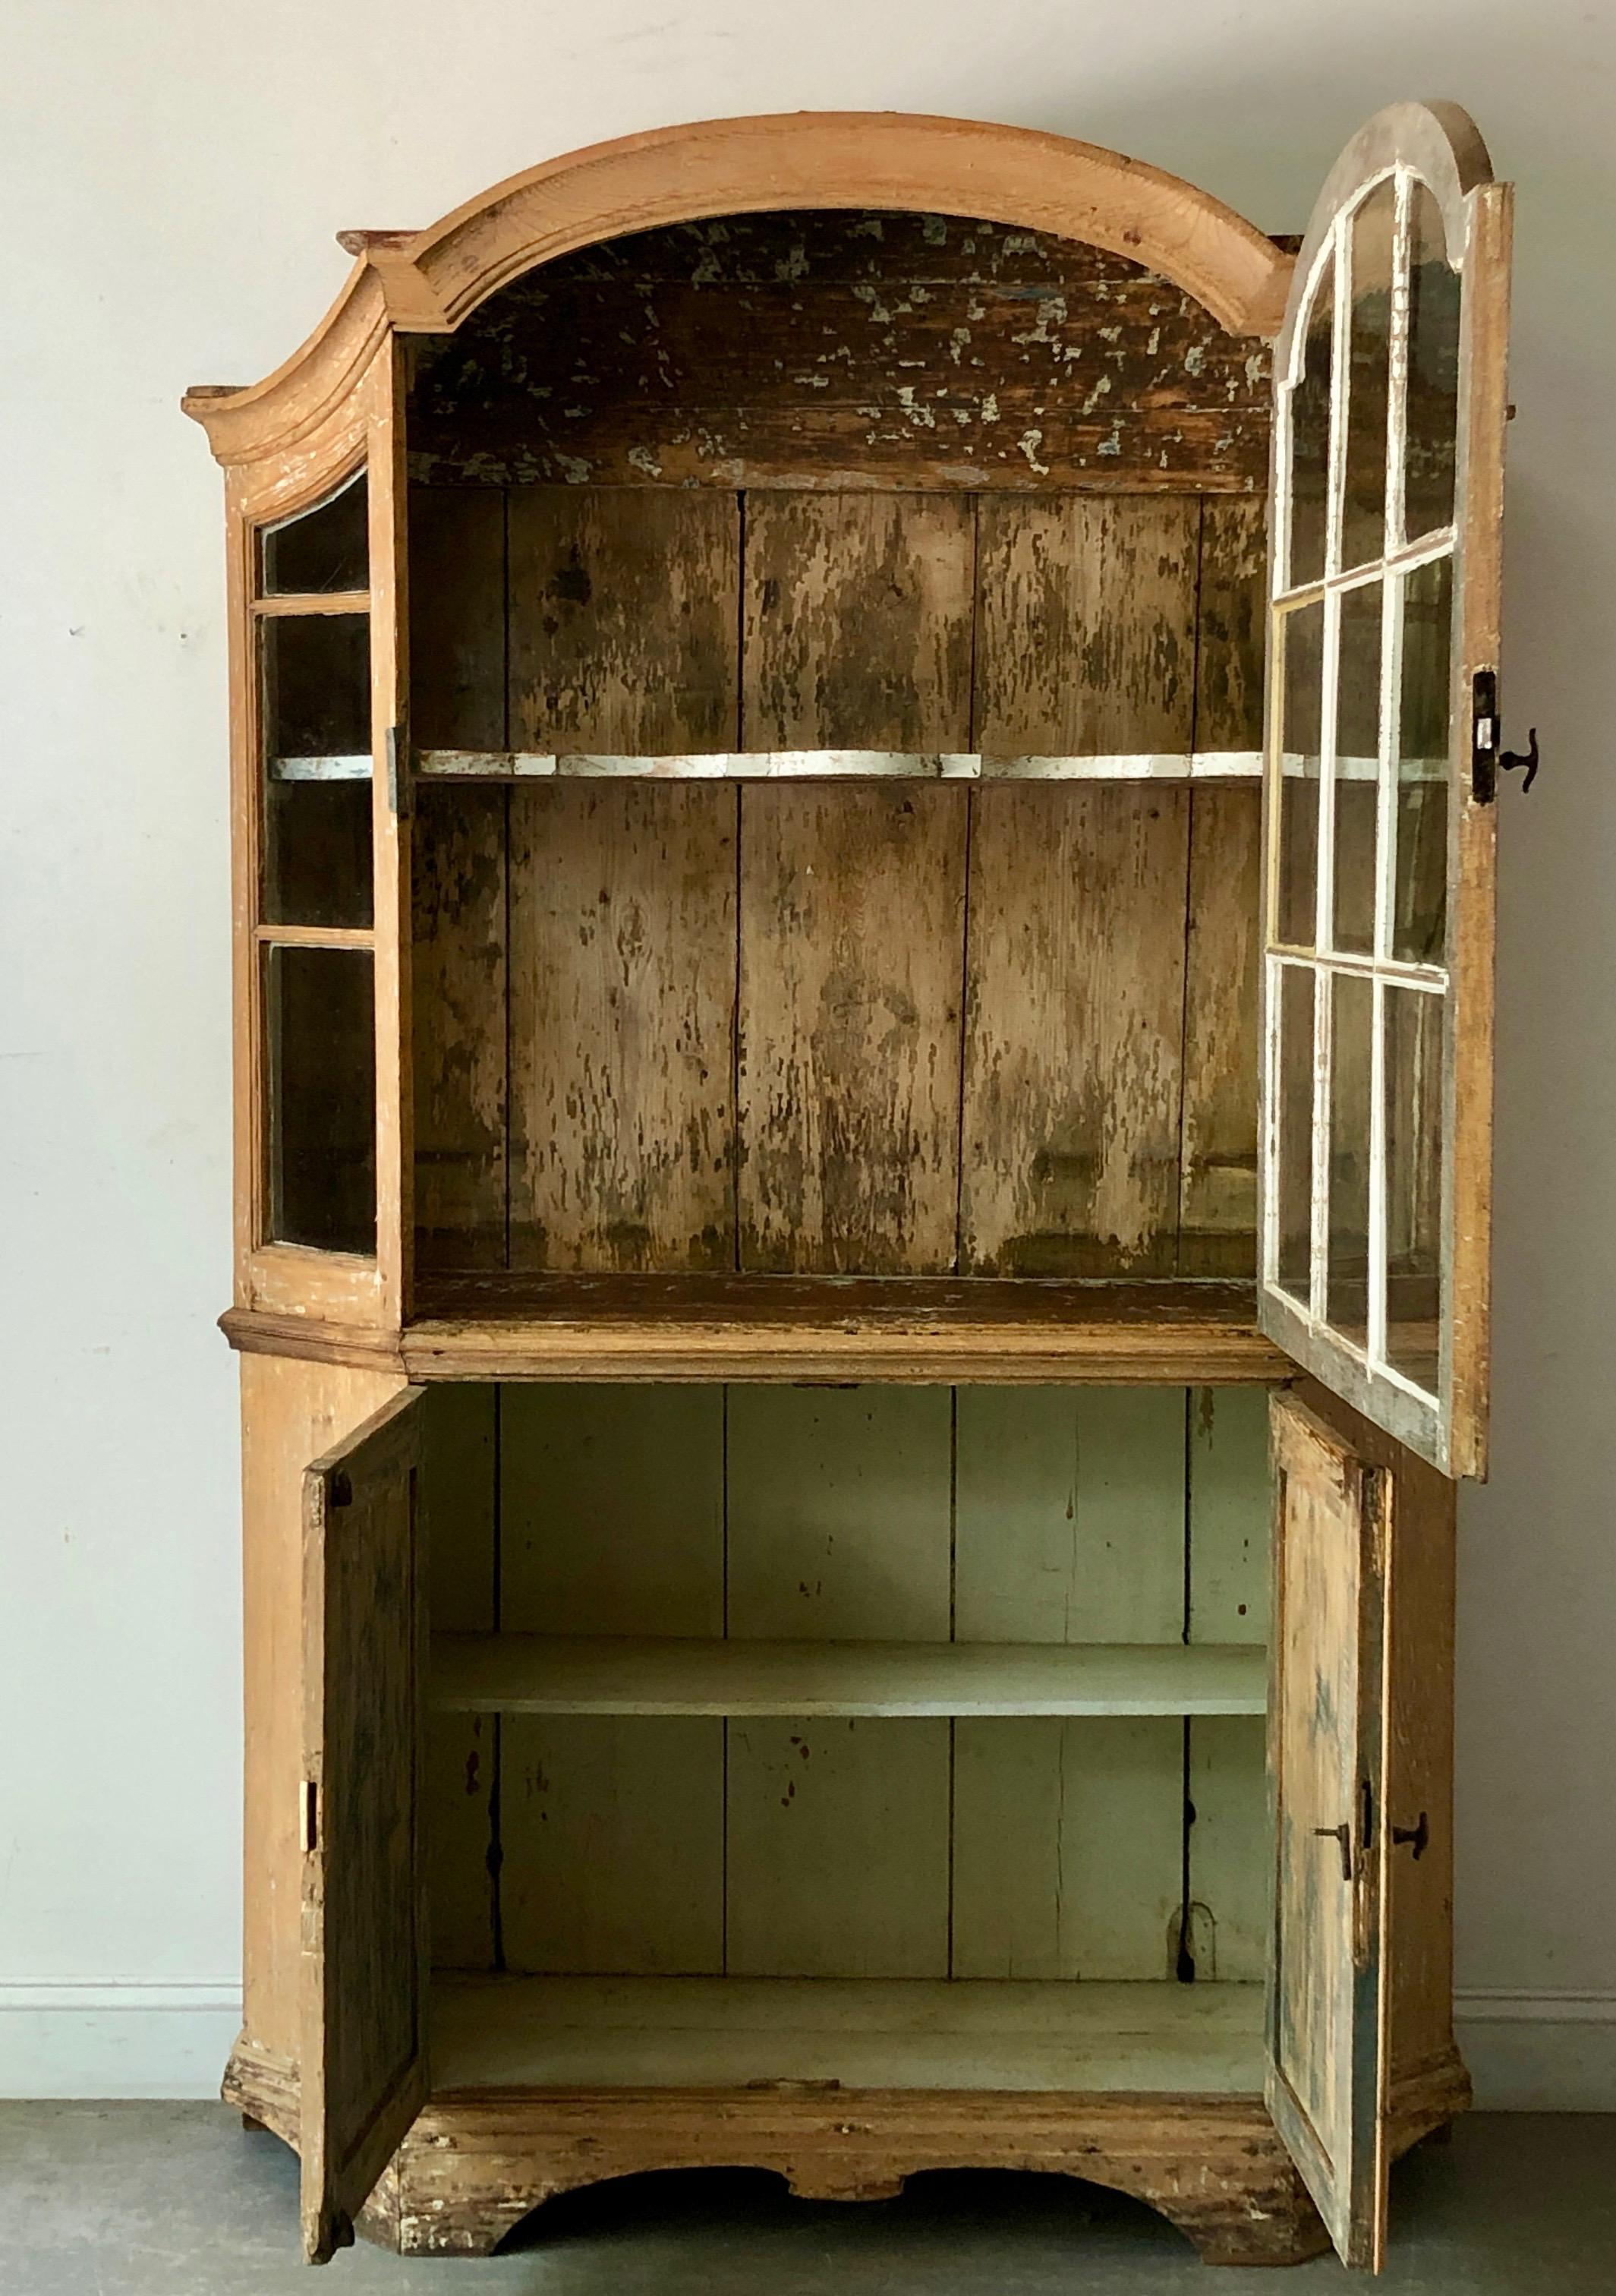 A very handsome 18th century Dutch cabinet vitrine in impressive scale with original hand blown glass, remnants of most original patinated color, beautifully shaped/scalloped interior shelve, arched pediment cornice and panelled doors.